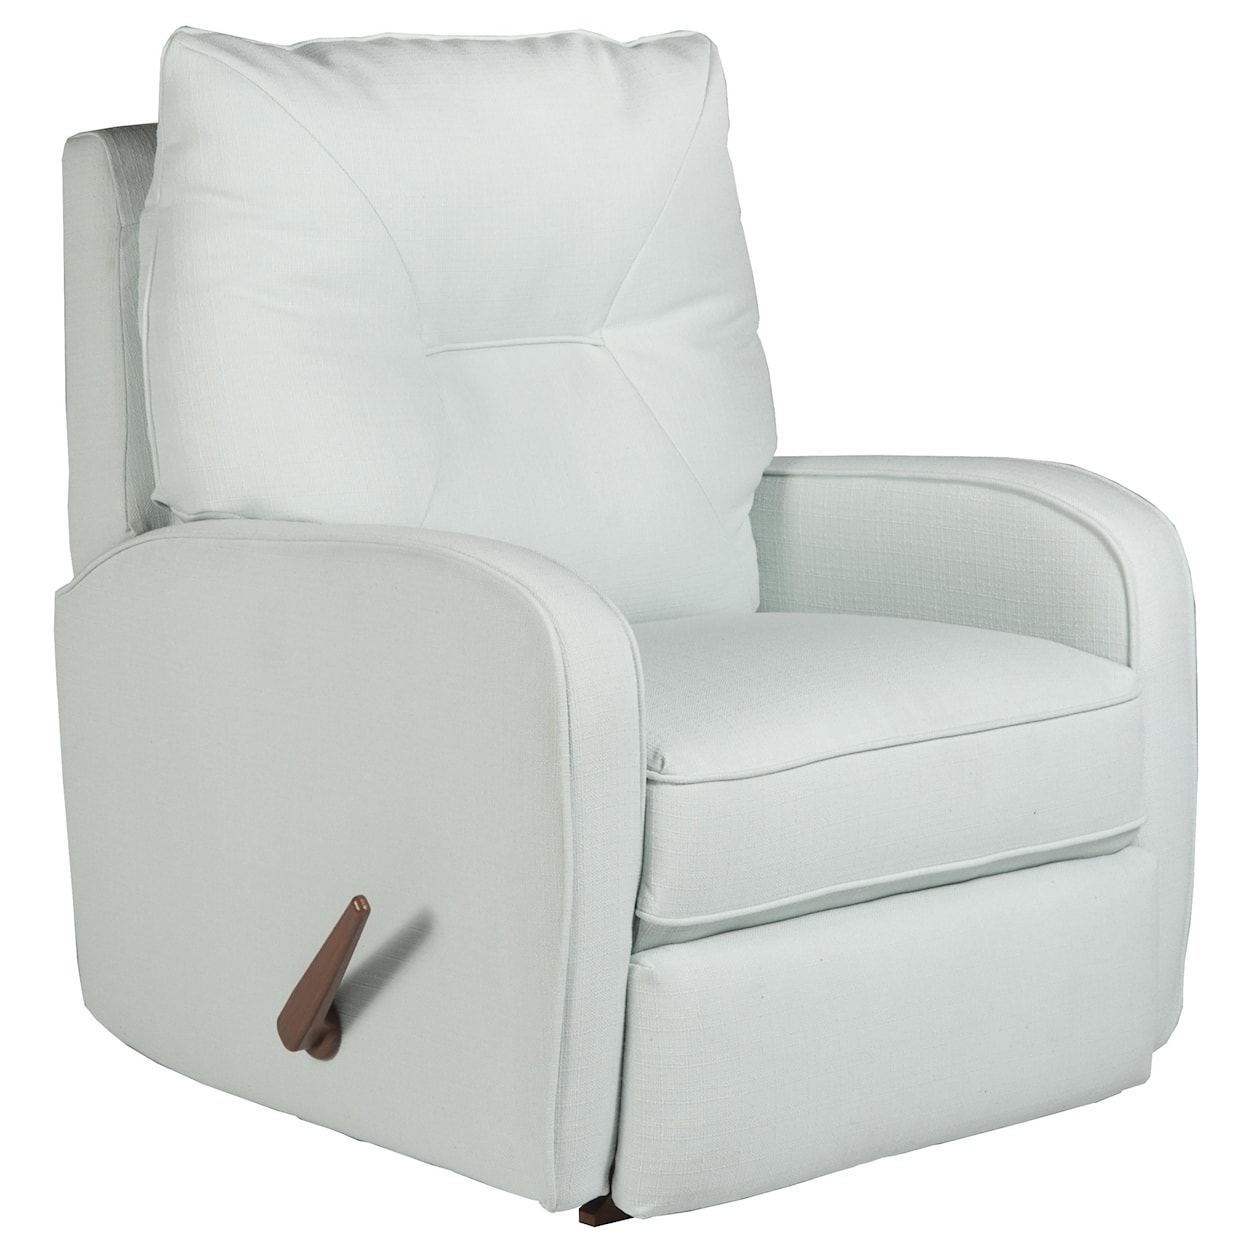 Best Home Furnishings Ingall Ingall Swivel Glider Recliner